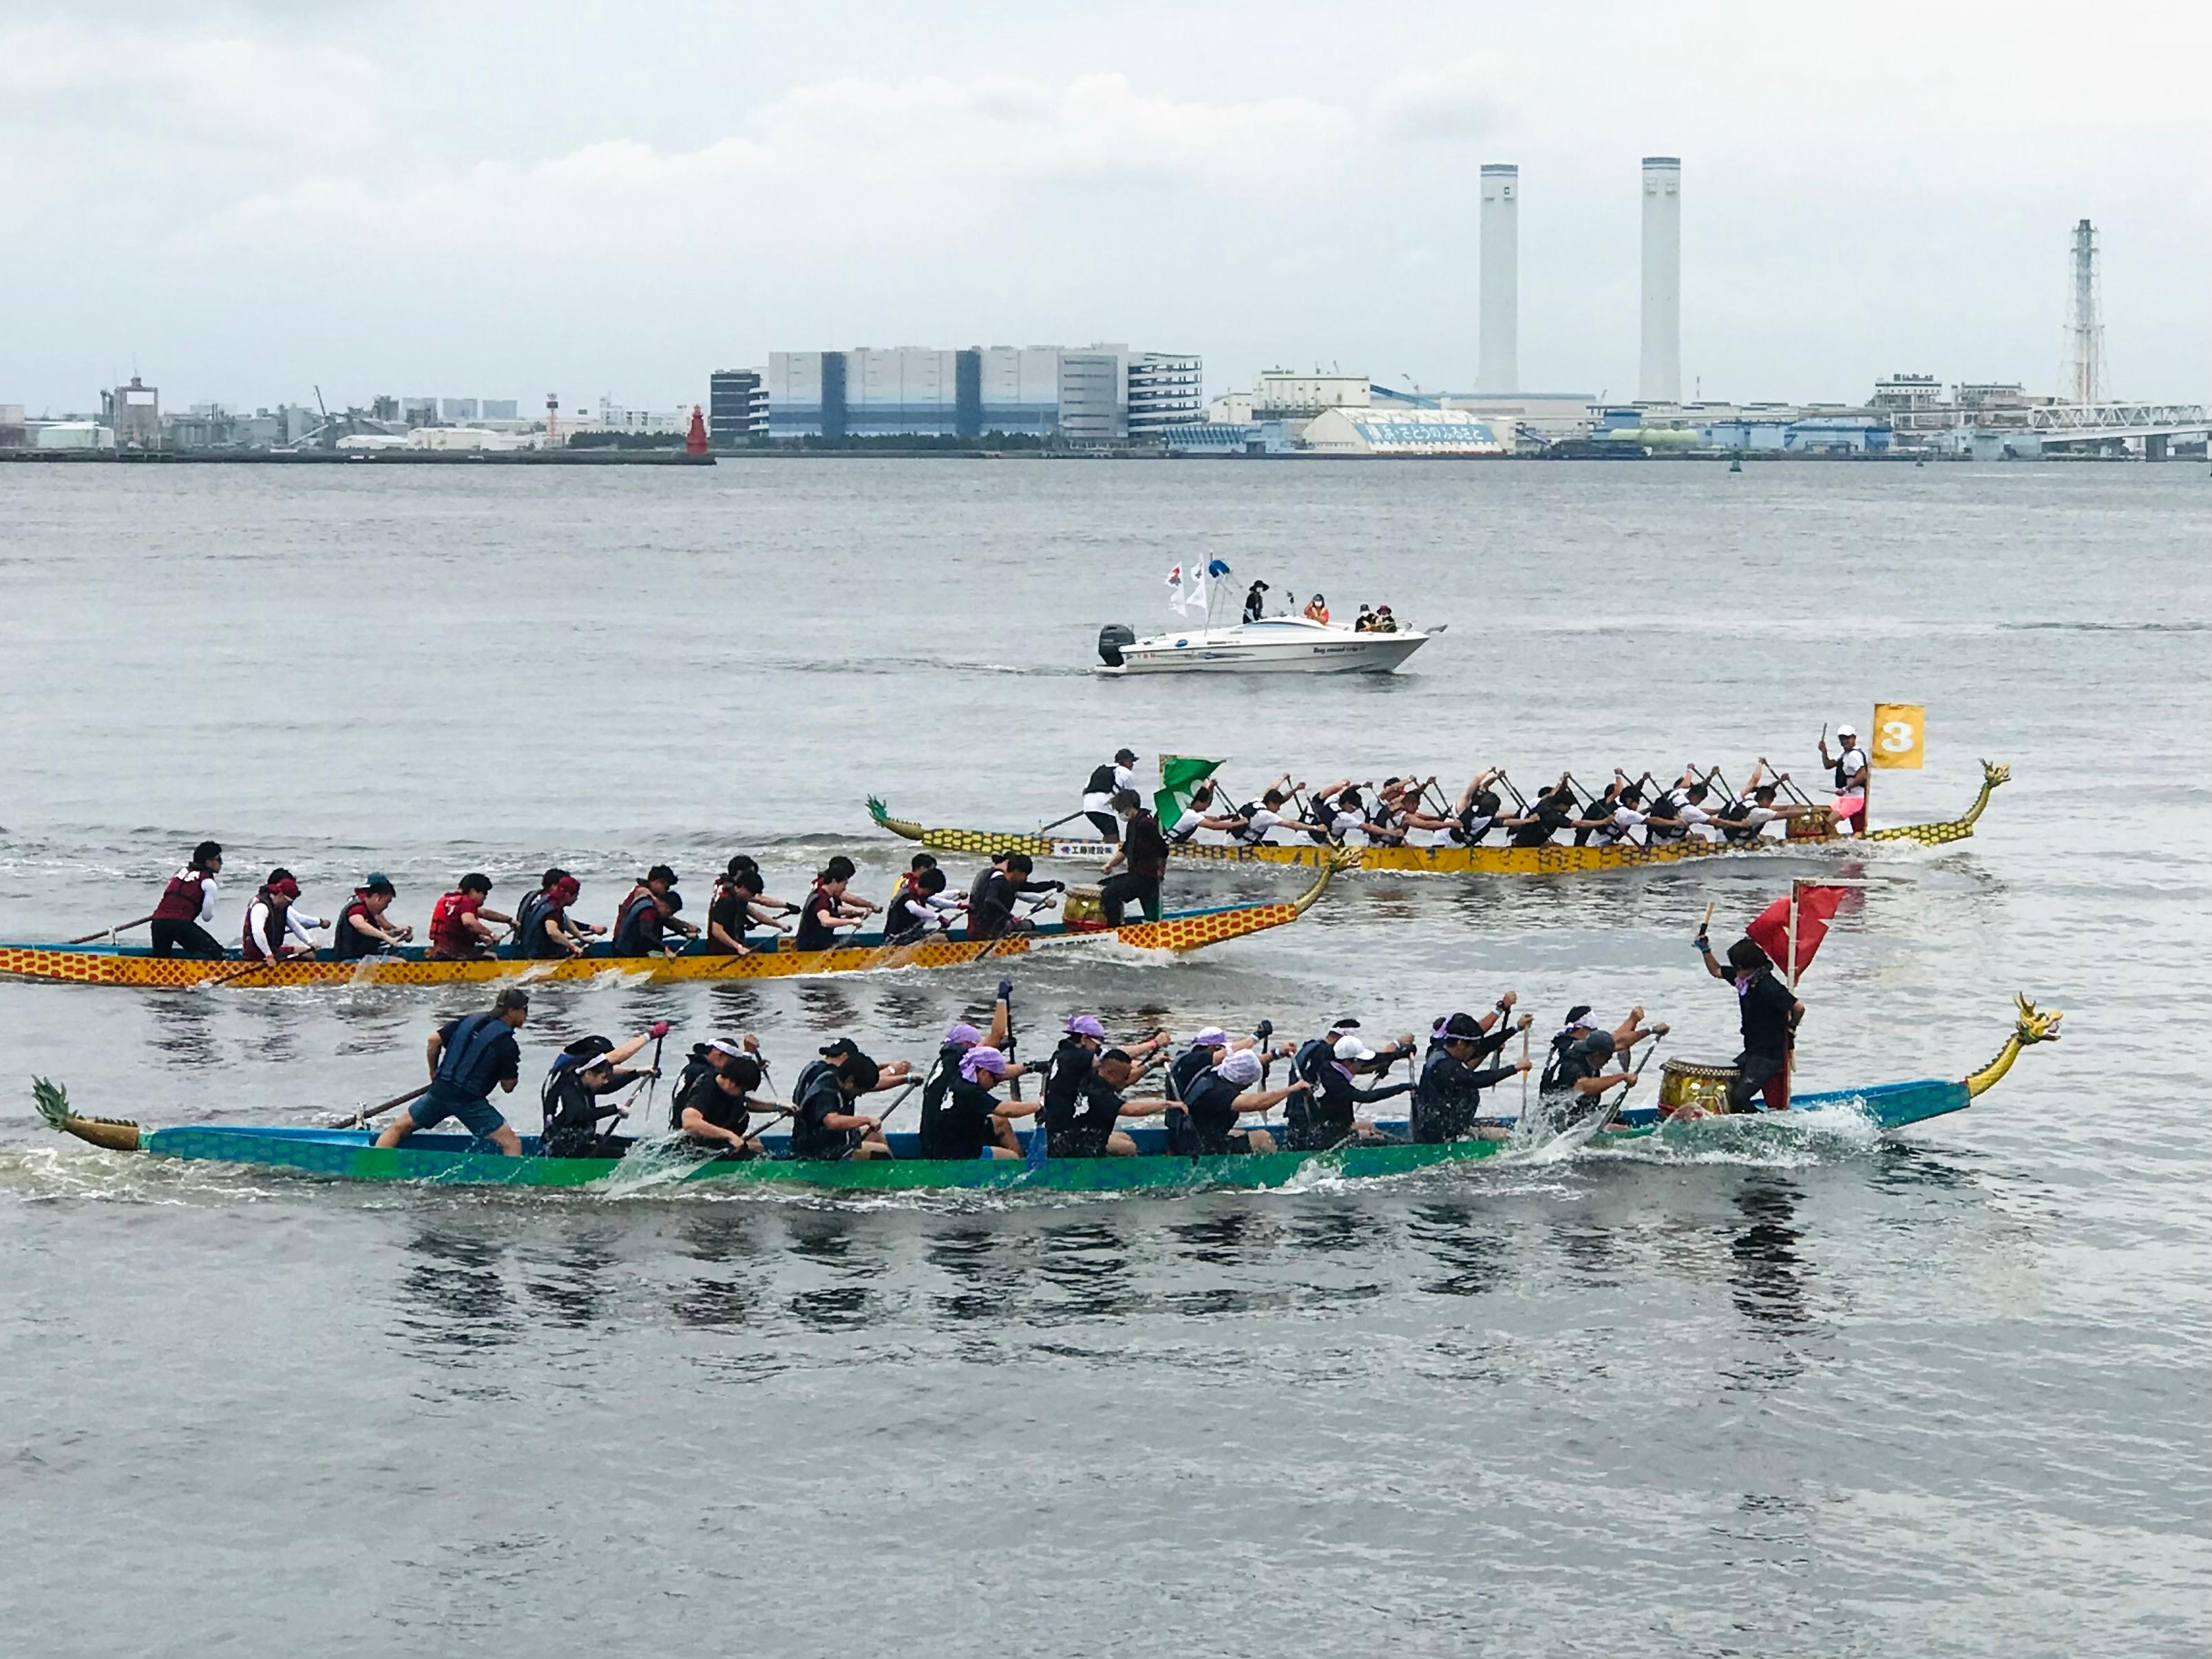 The commemorative Hong Kong Cup dragon boat race to celebrate the 25th anniversary of the establishment of the Hong Kong Special Administrative Region was held at the promenade of Yamashita Park in Yokohama, Japan, today (June 5). Photo shows paddlers competing in the race.